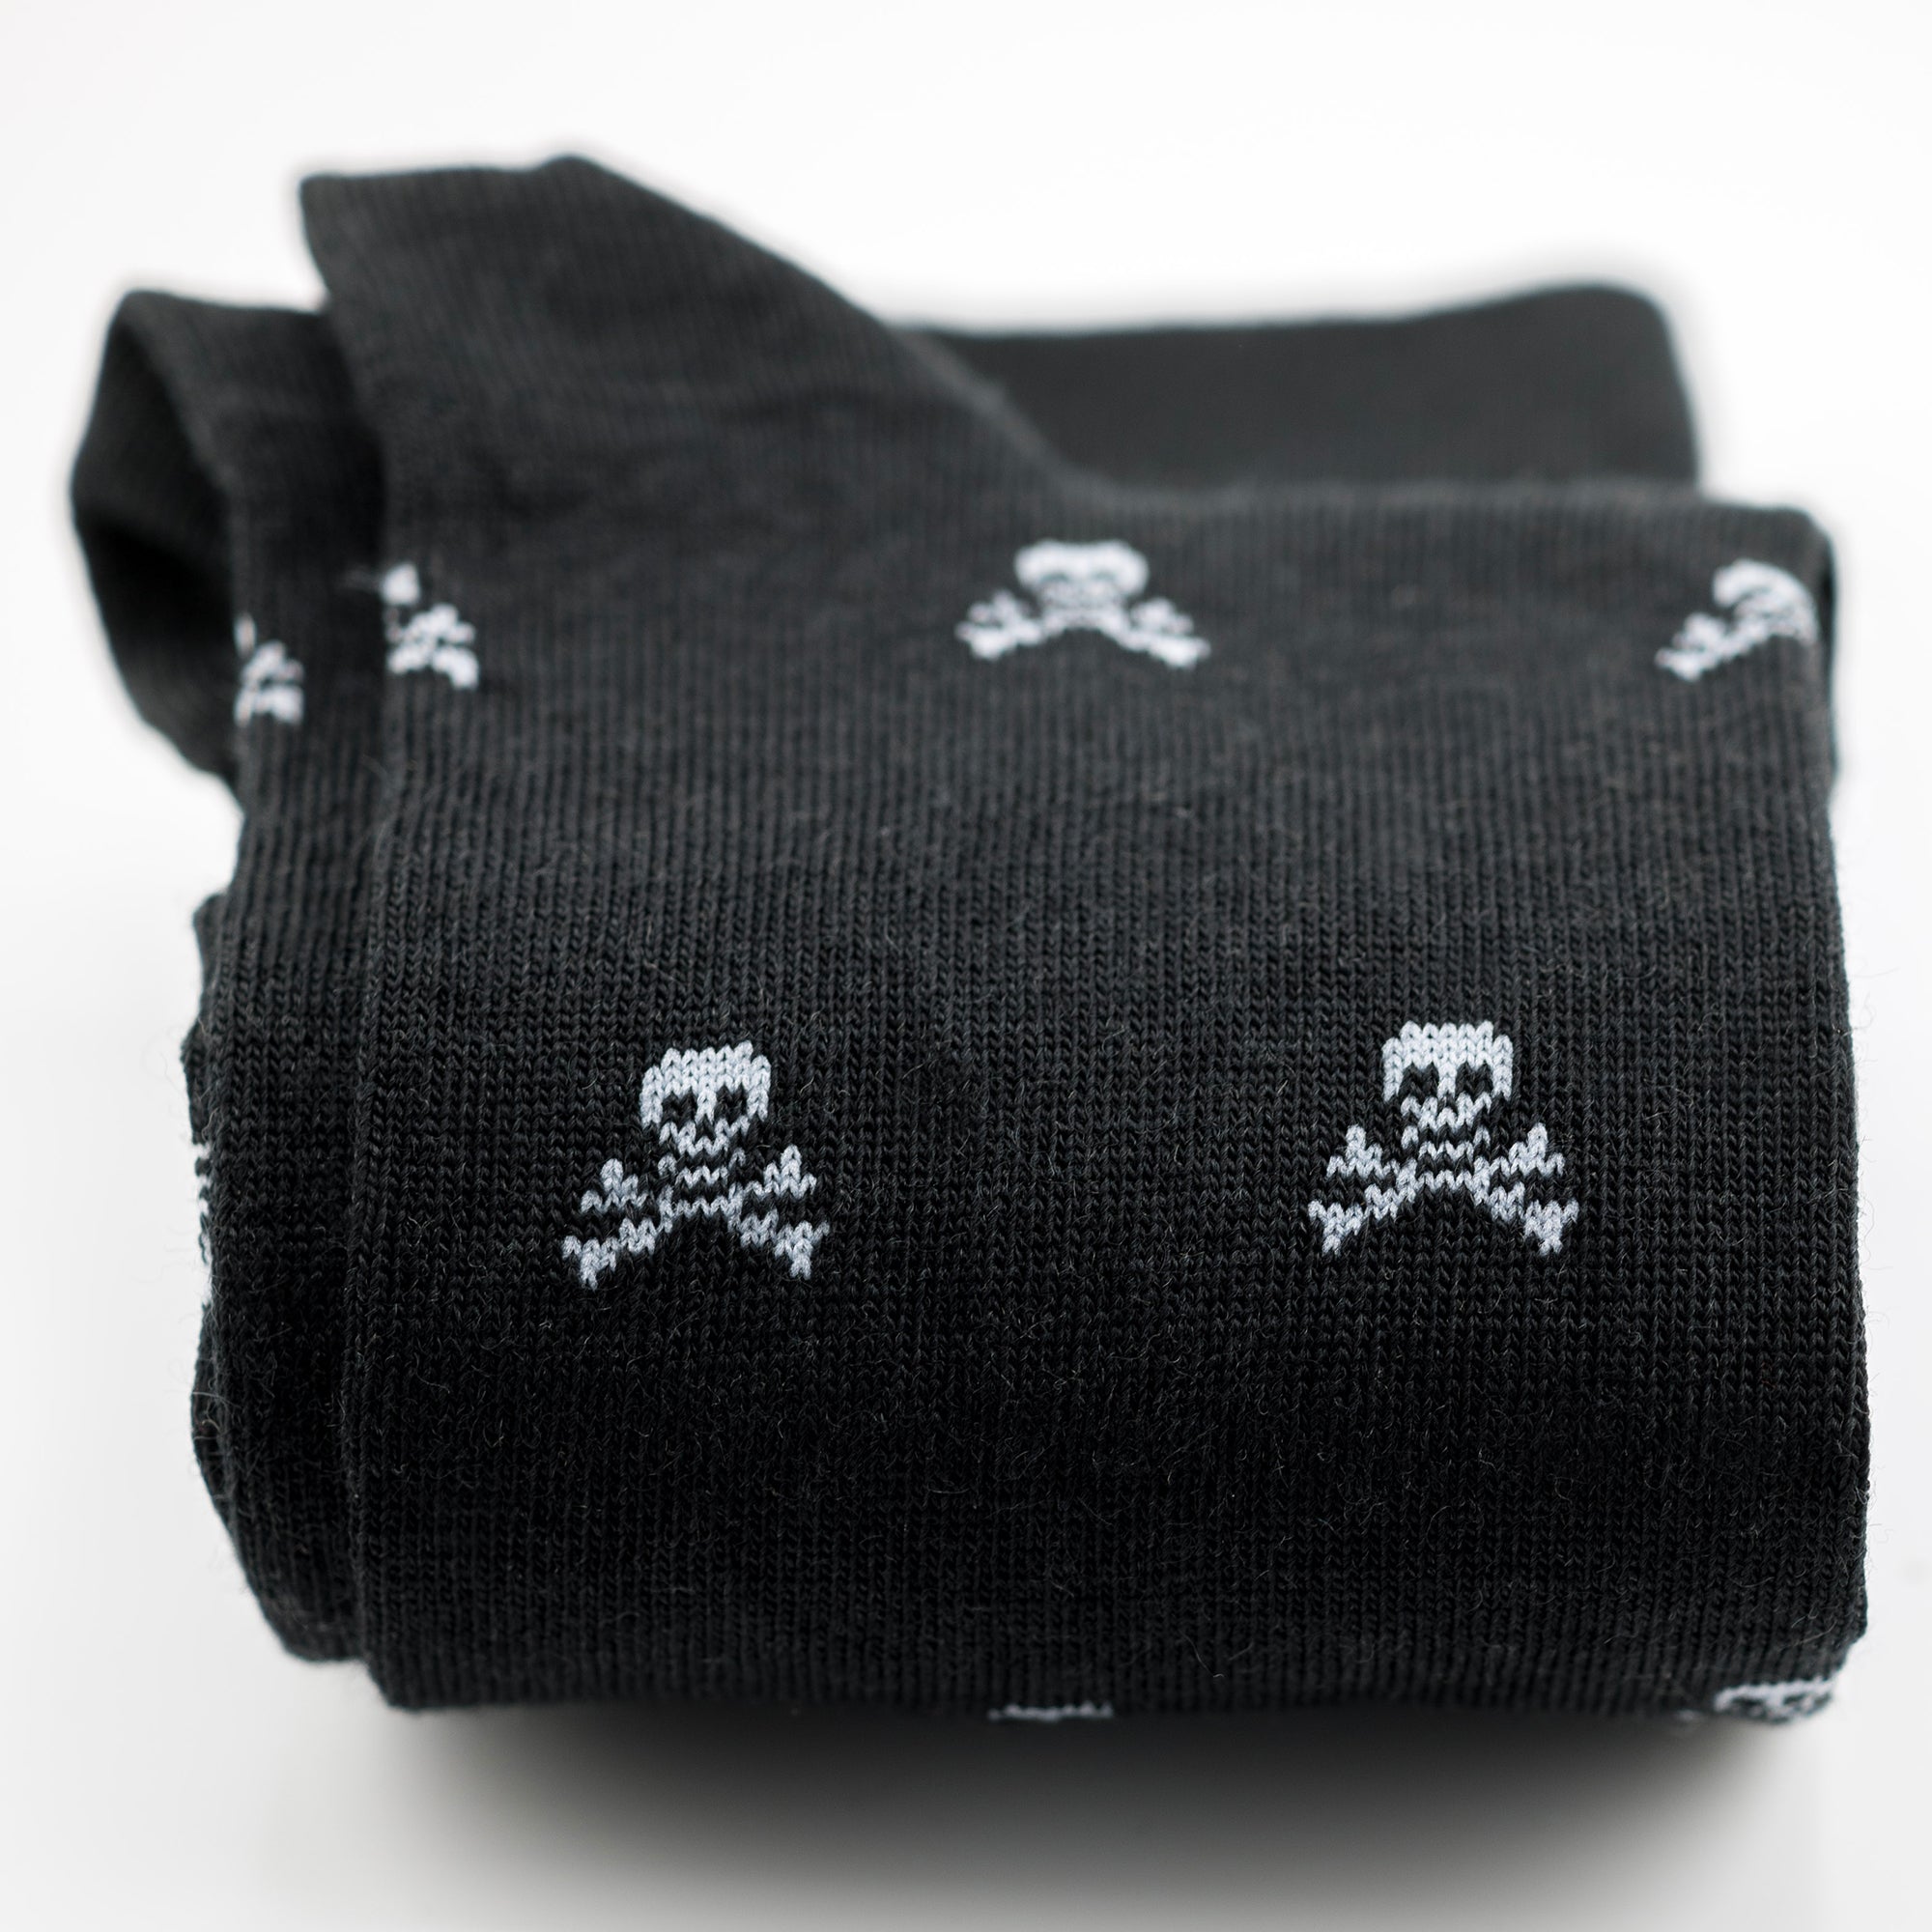 pair of black wool dress socks decorated with skull and bones